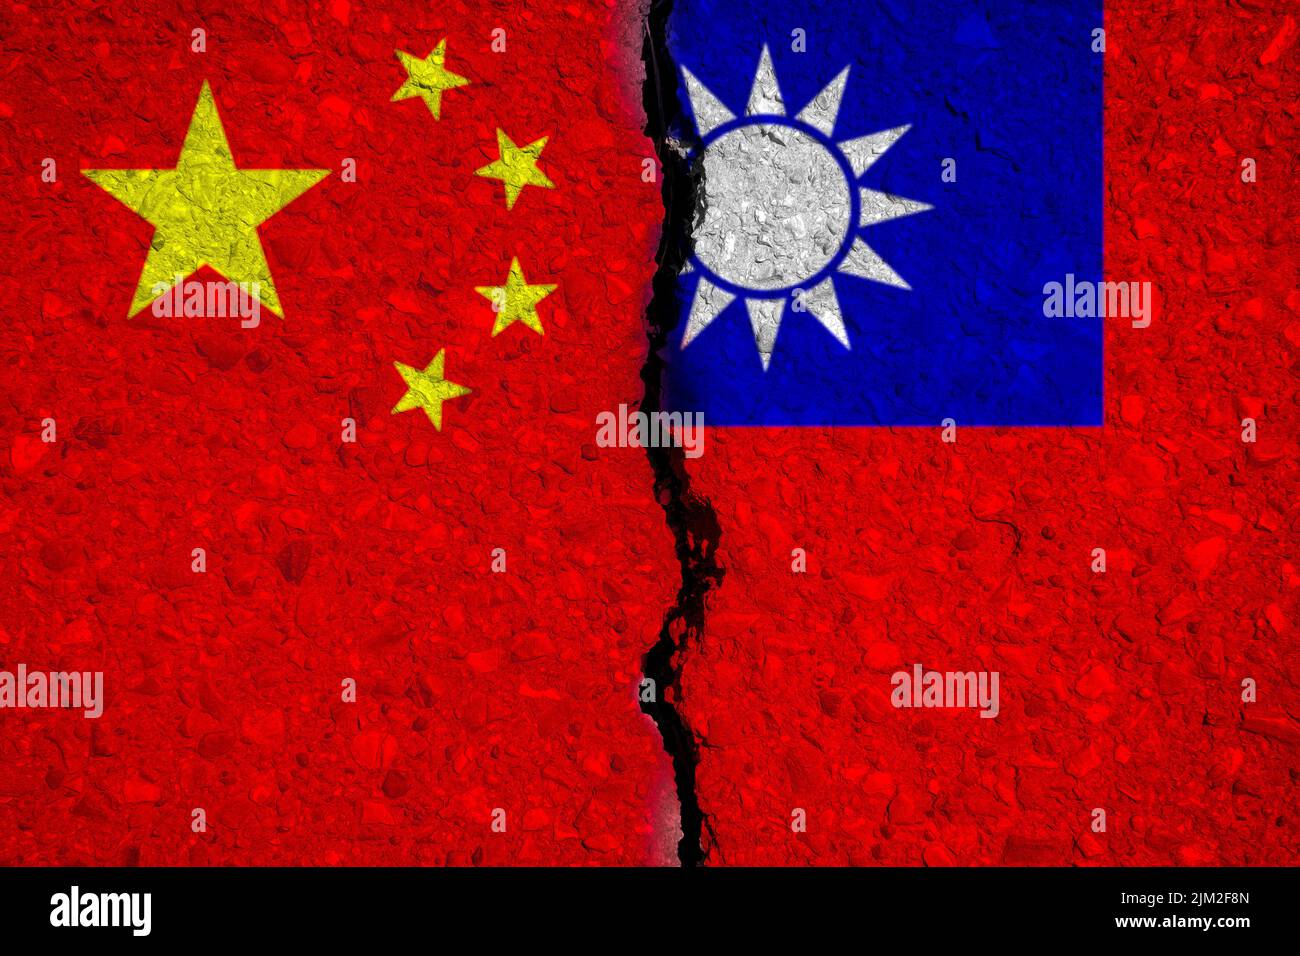 Symbol Image Conflict And War Between The People S Republic Of China And Taiwan PHOTOMONTAGE Stock Photo